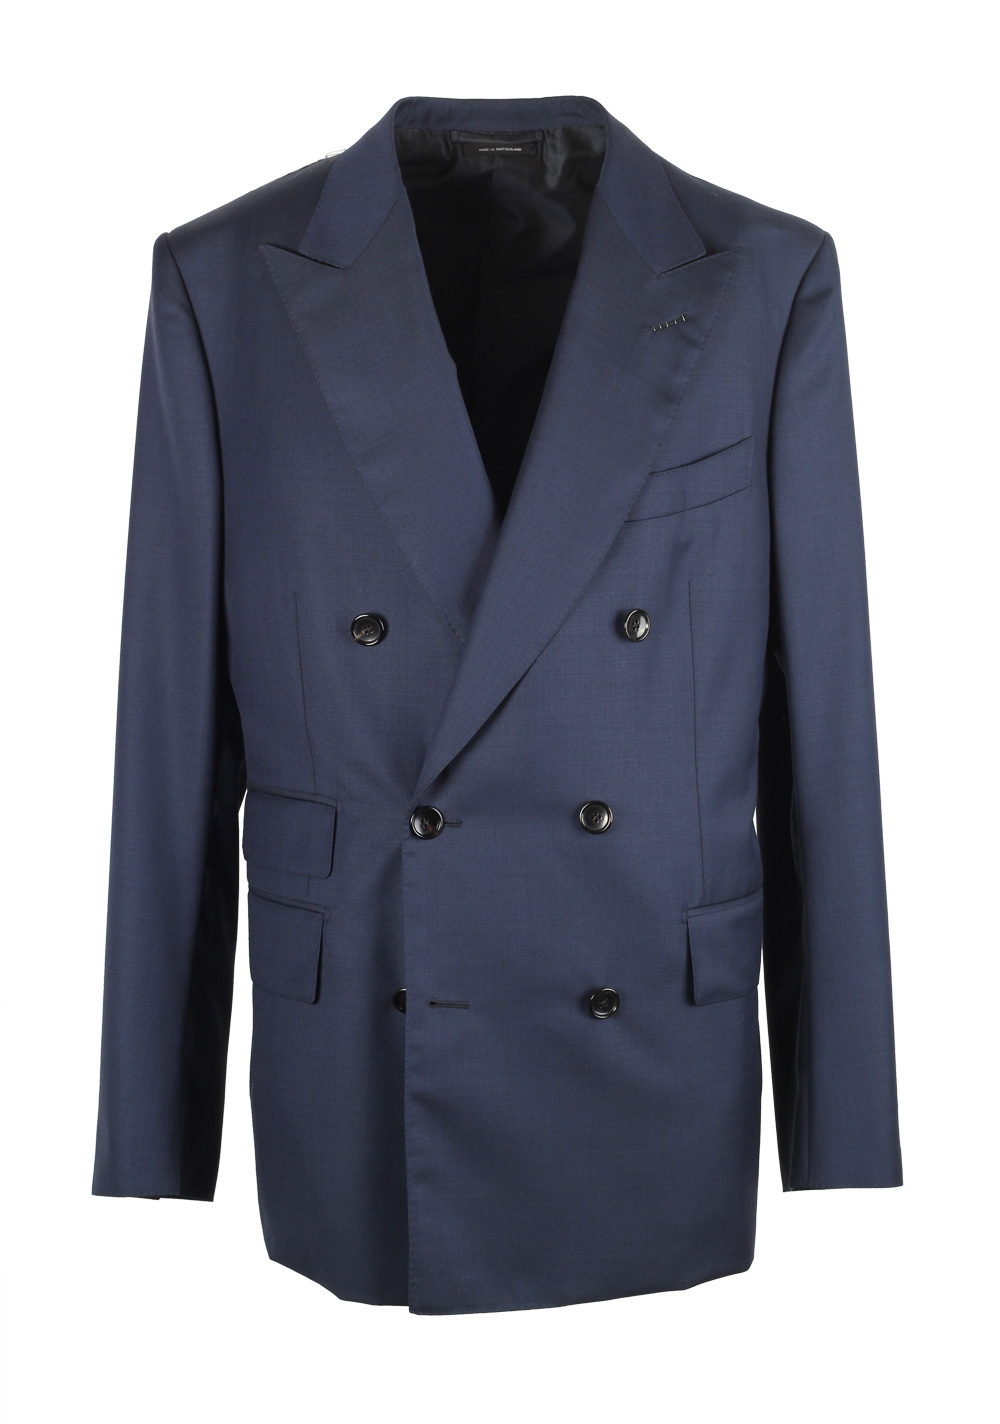 TOM FORD Shelton Double Breasted Blue Sport Coat Size 52 / 42R U.S. | Costume Limité